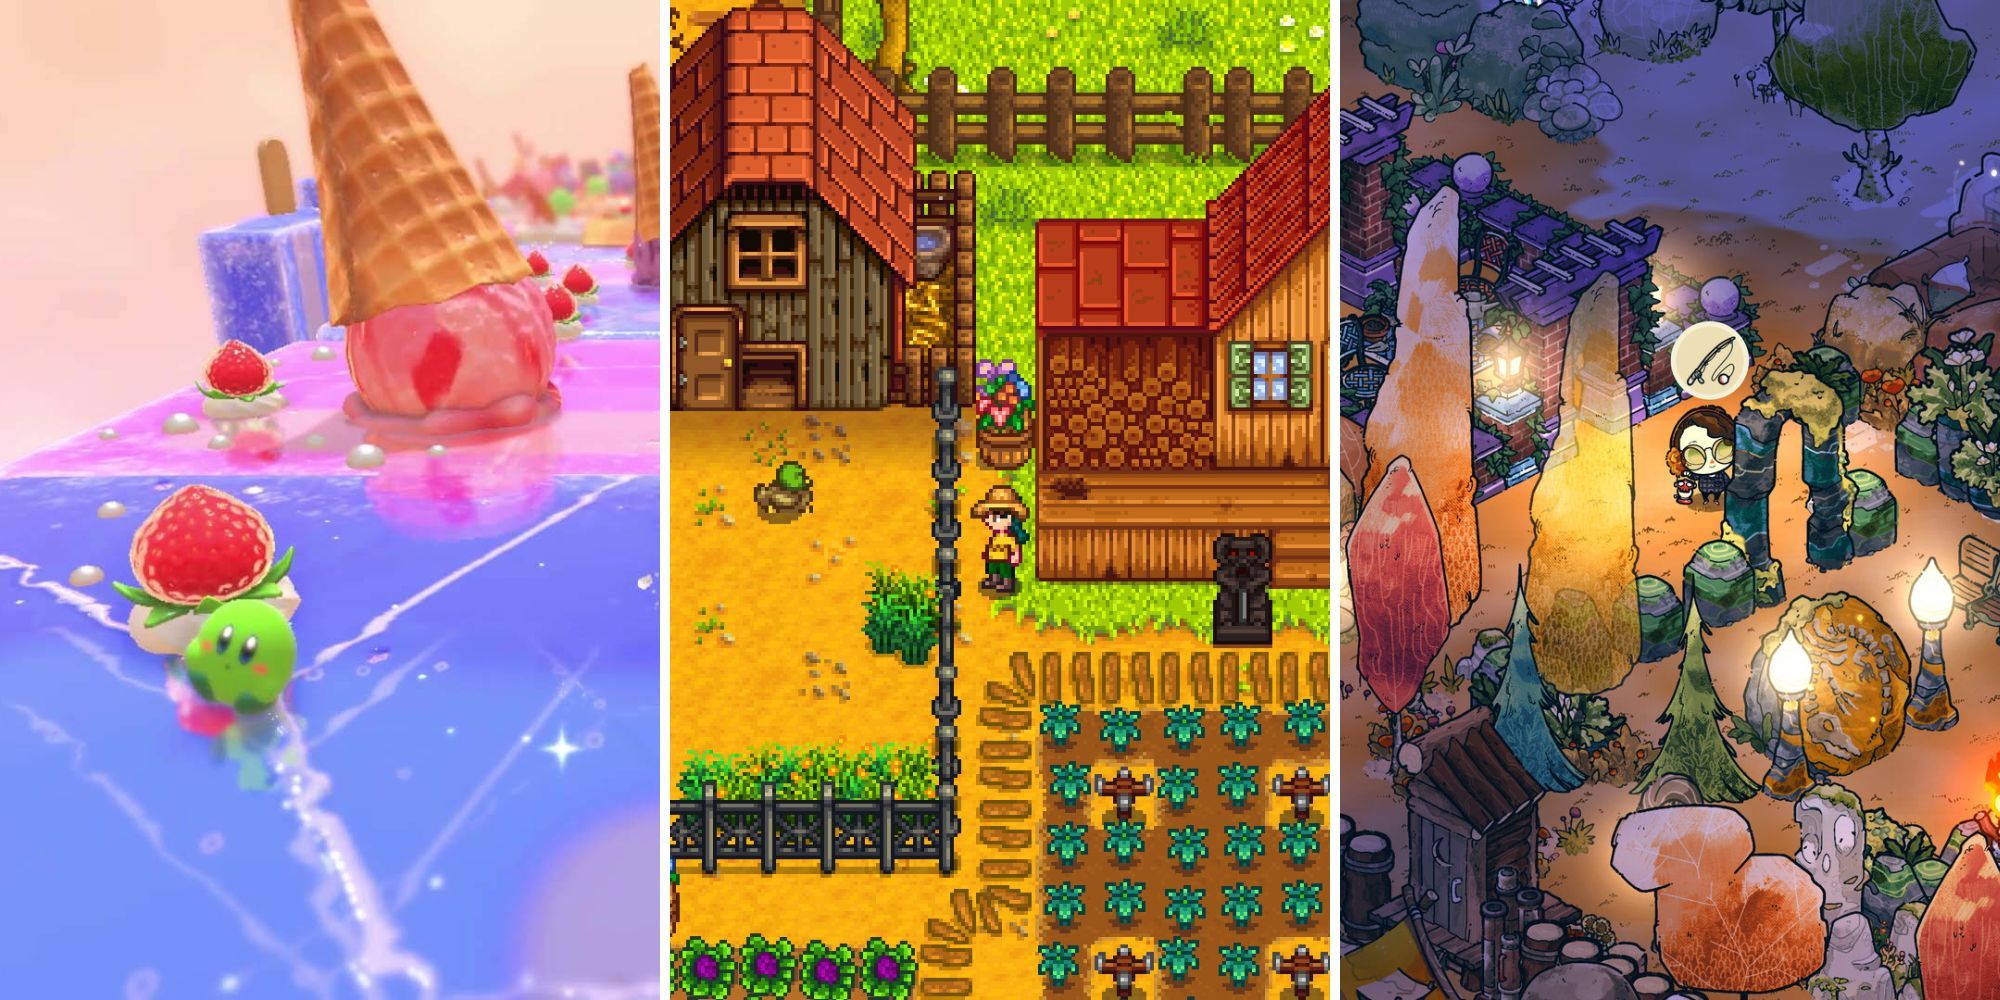 A grid of three images showing the cozy games Kirby's Dream Buffet, Stardew Valley, and Cozy Grove